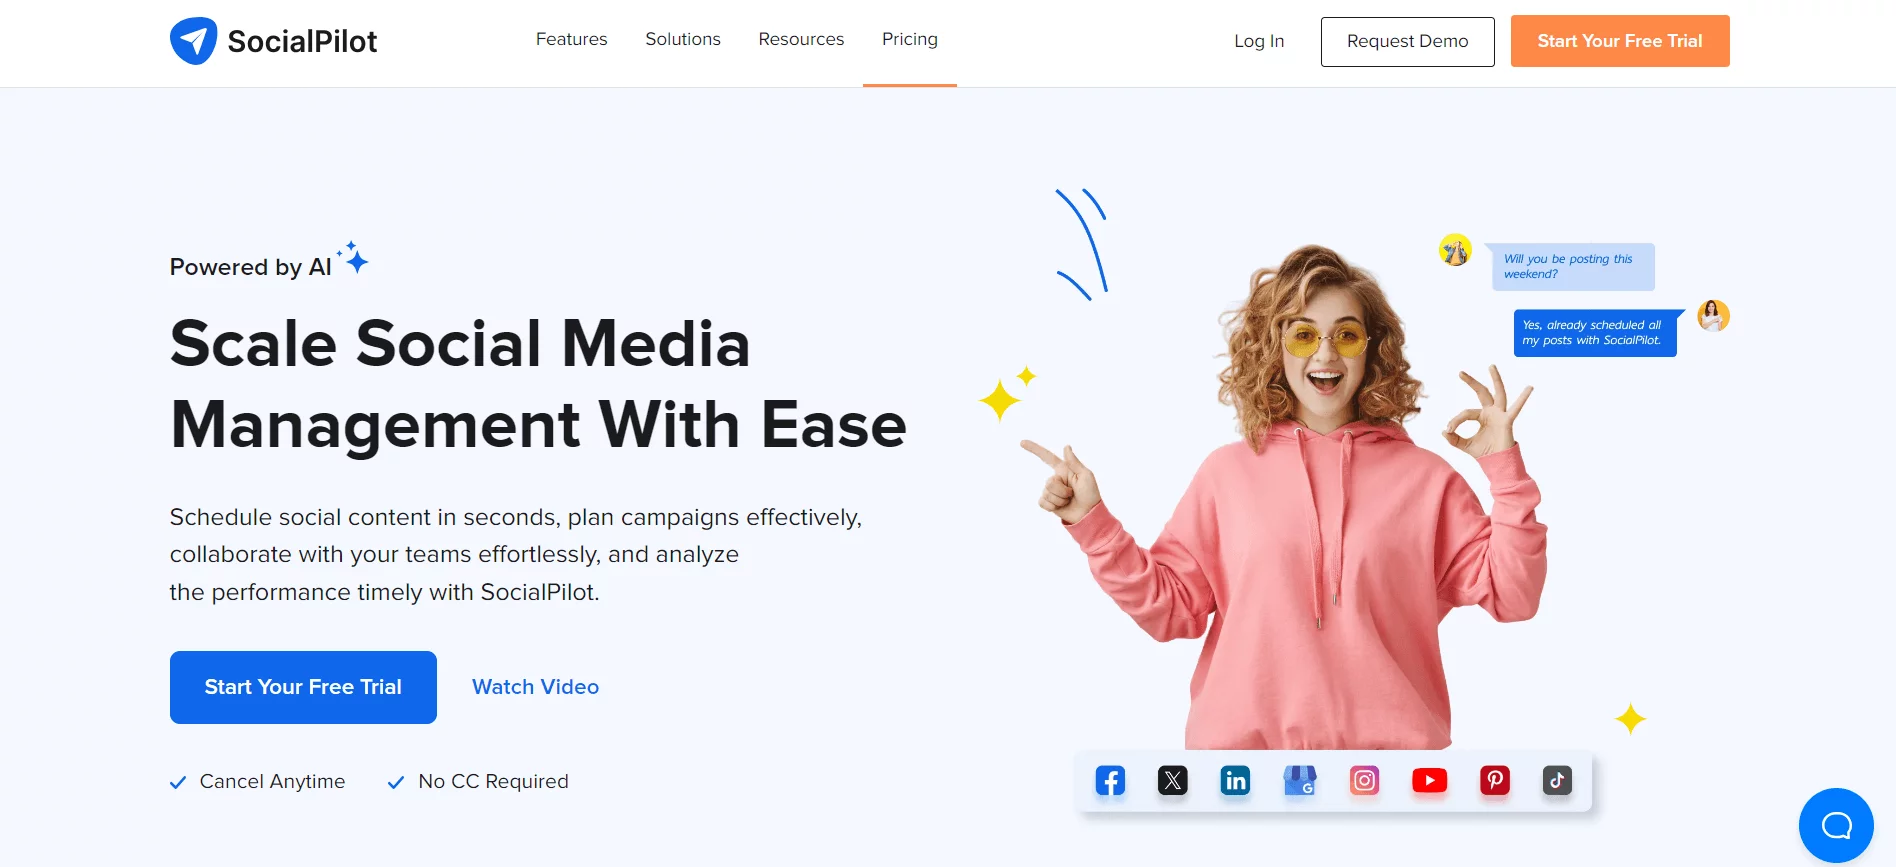 Homepage of SocialPilot highlighting AI-powered social media management tools, featuring a joyful woman pointing upwards, with options to start a free trial or watch a video demo.